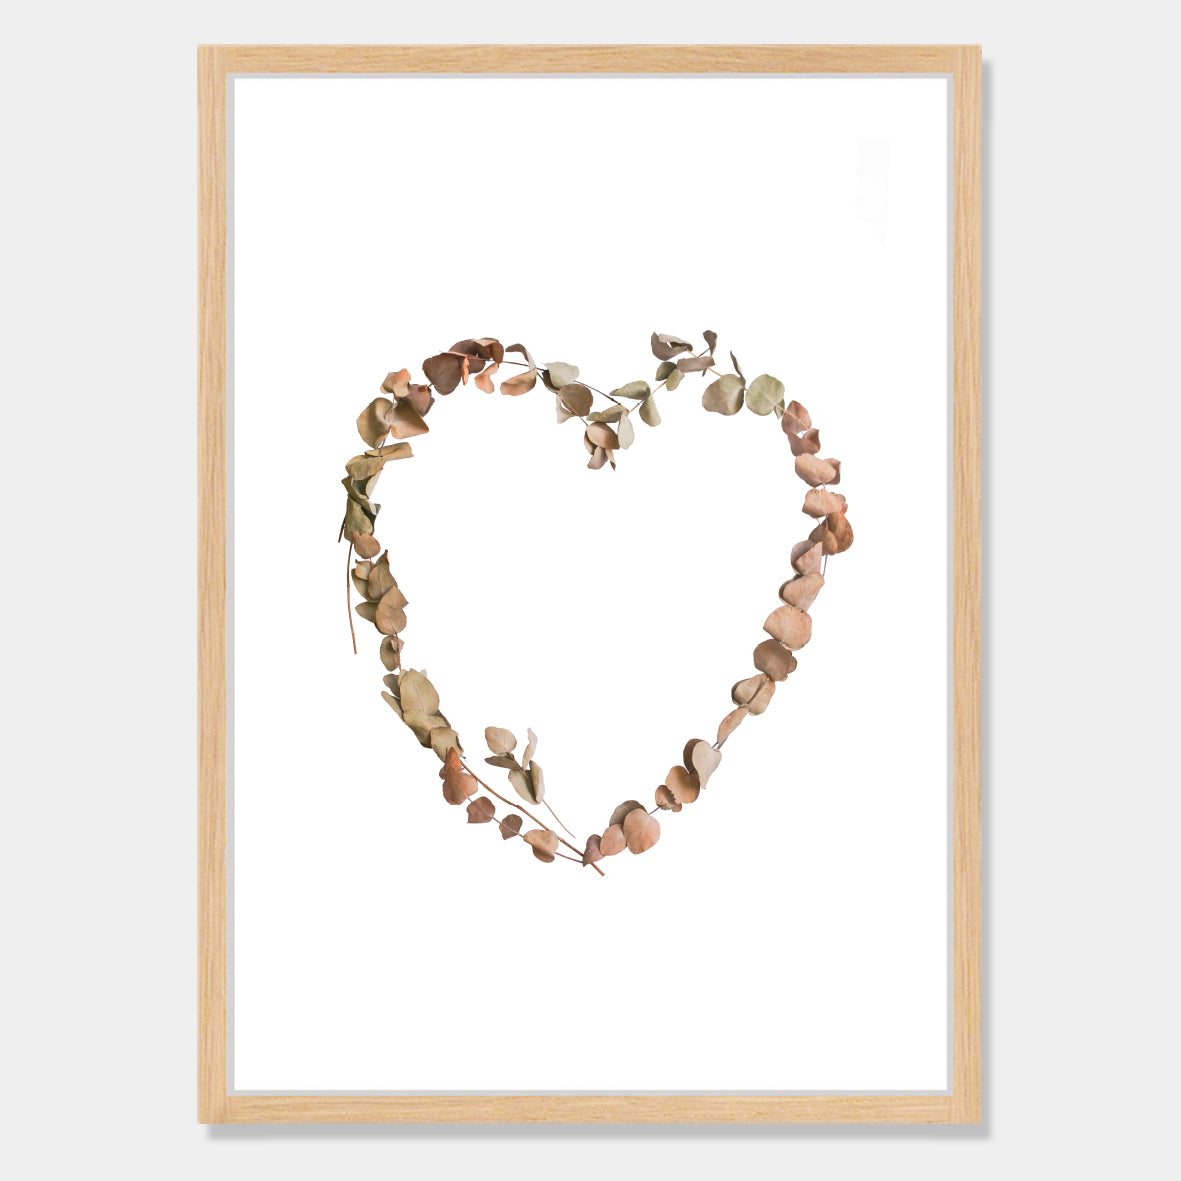 Photographic art print of dried leaves in a heart shape by Bon Jung. Printed in New Zealand by endemicworld and framed in raw oak.